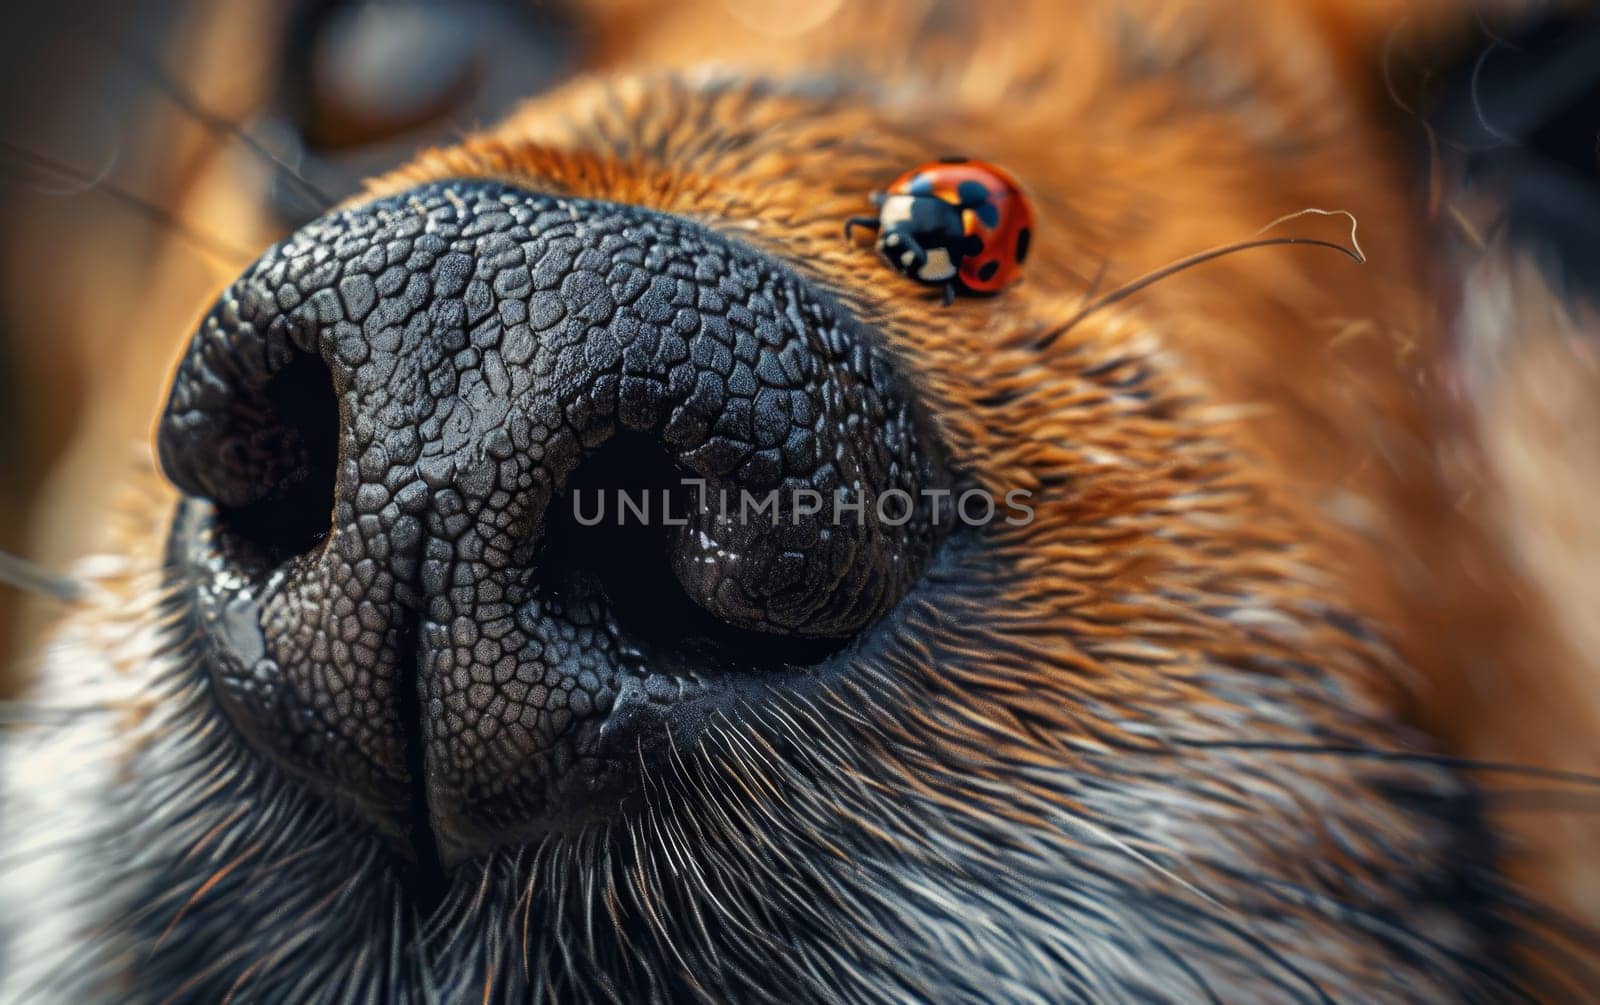 On the journey of its glossy back, a ladybug explores the vast landscape of a dog's snout, a world of textures and shades. The tiny traveler adds a pop of color to the canine's muted tones.. by sfinks